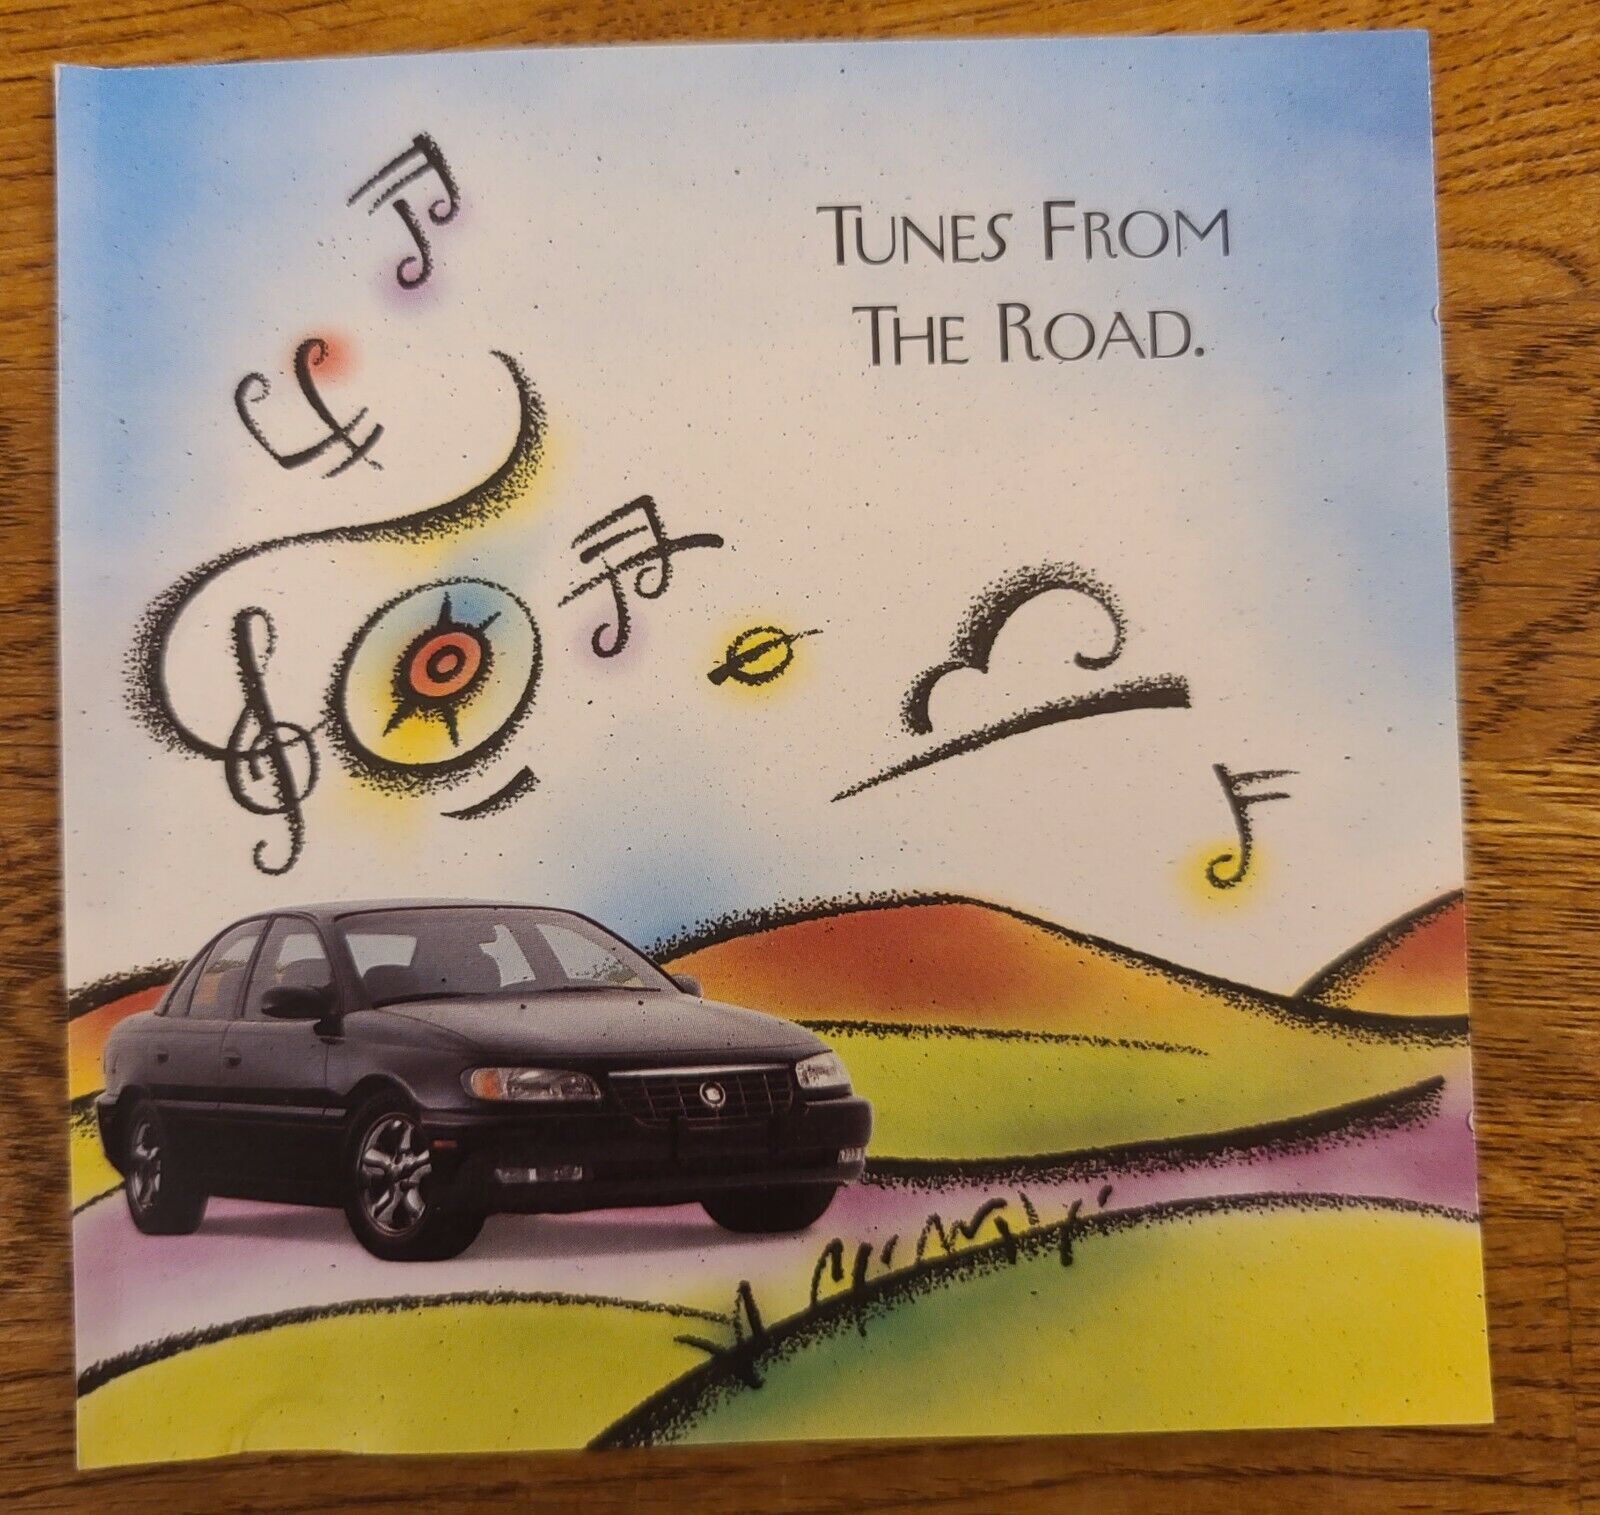 Tunes from the Road - Cadillac Catera Various Artists Mix CD 1996